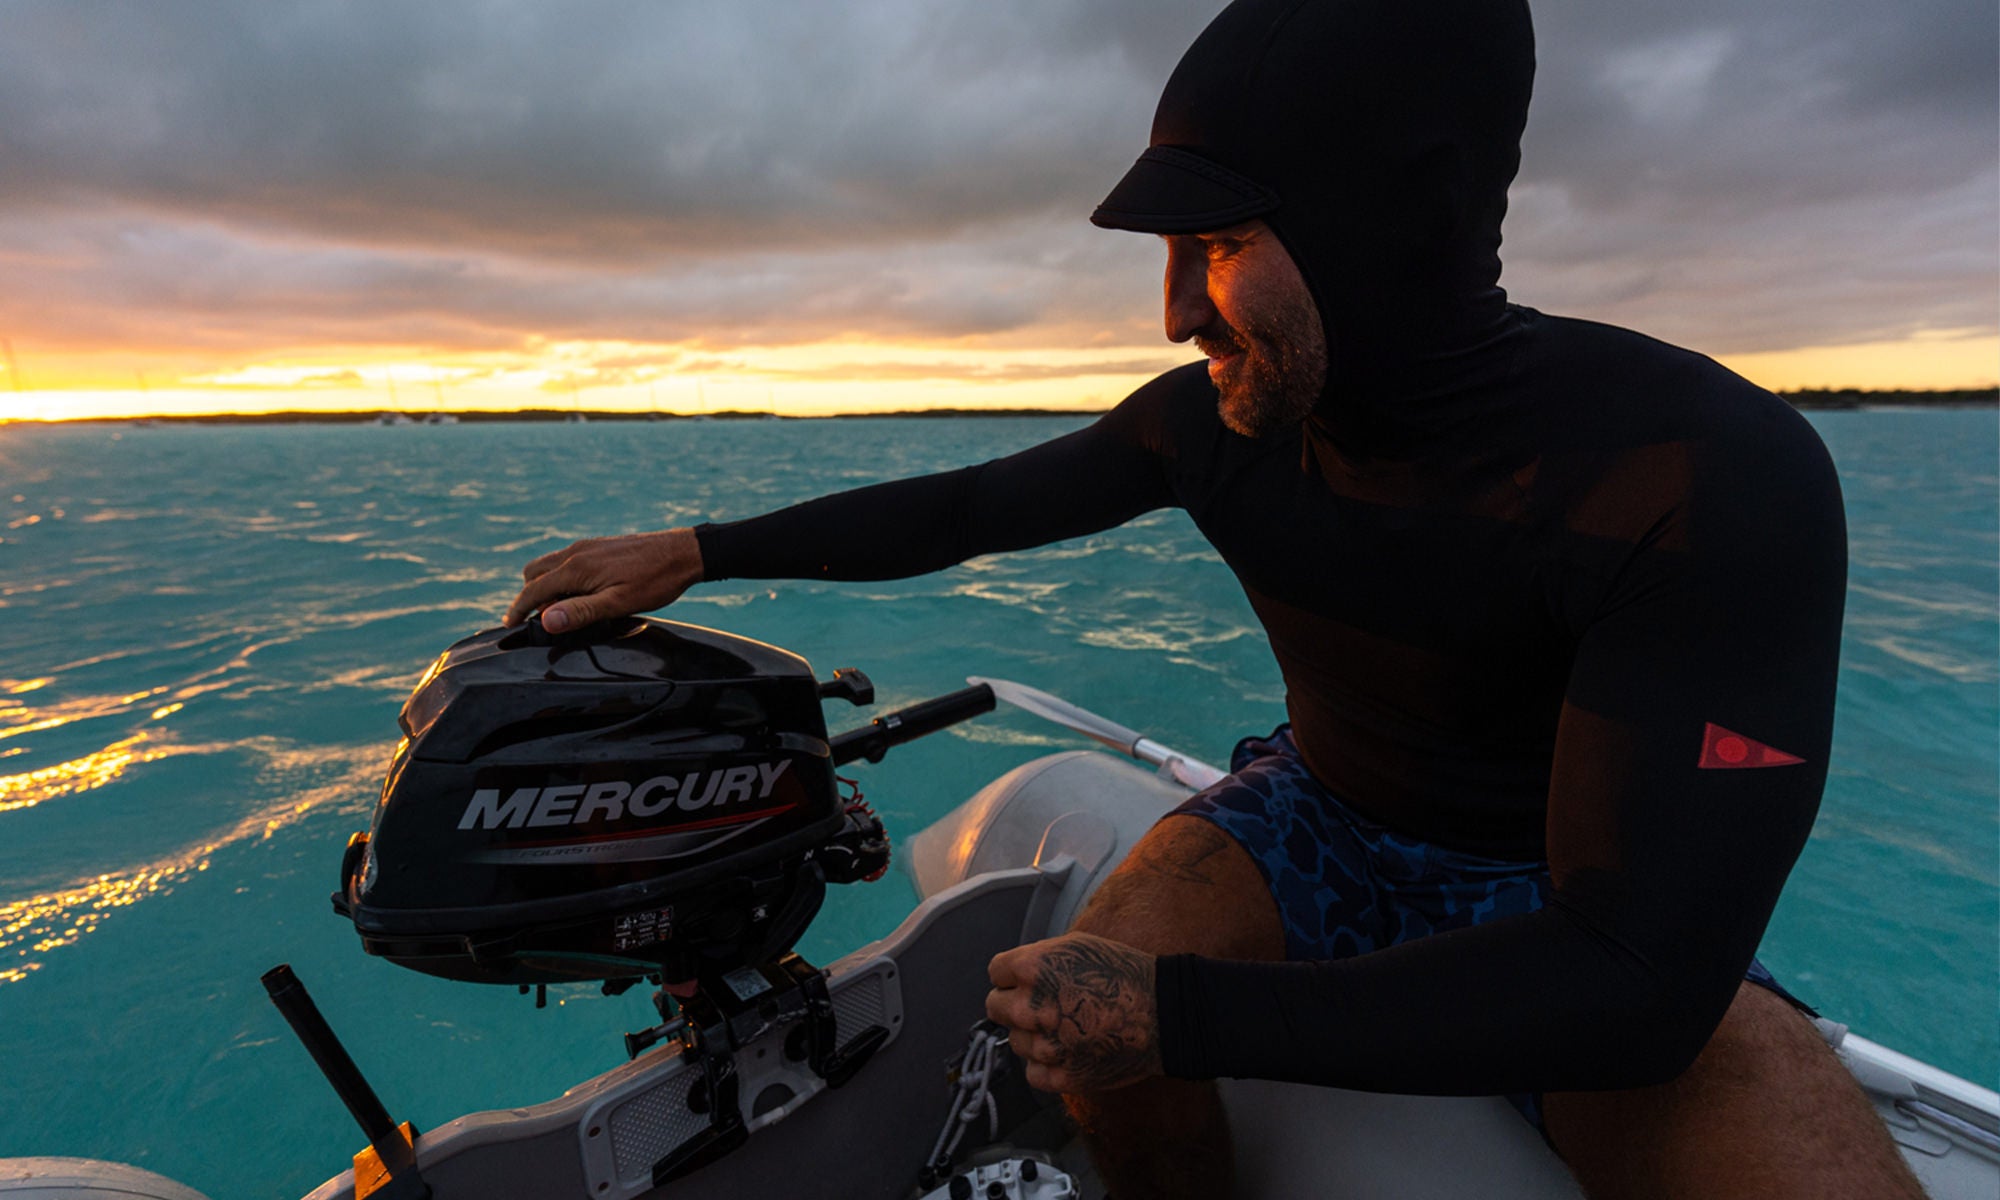 Sunset on the boat with a hooded rash guard